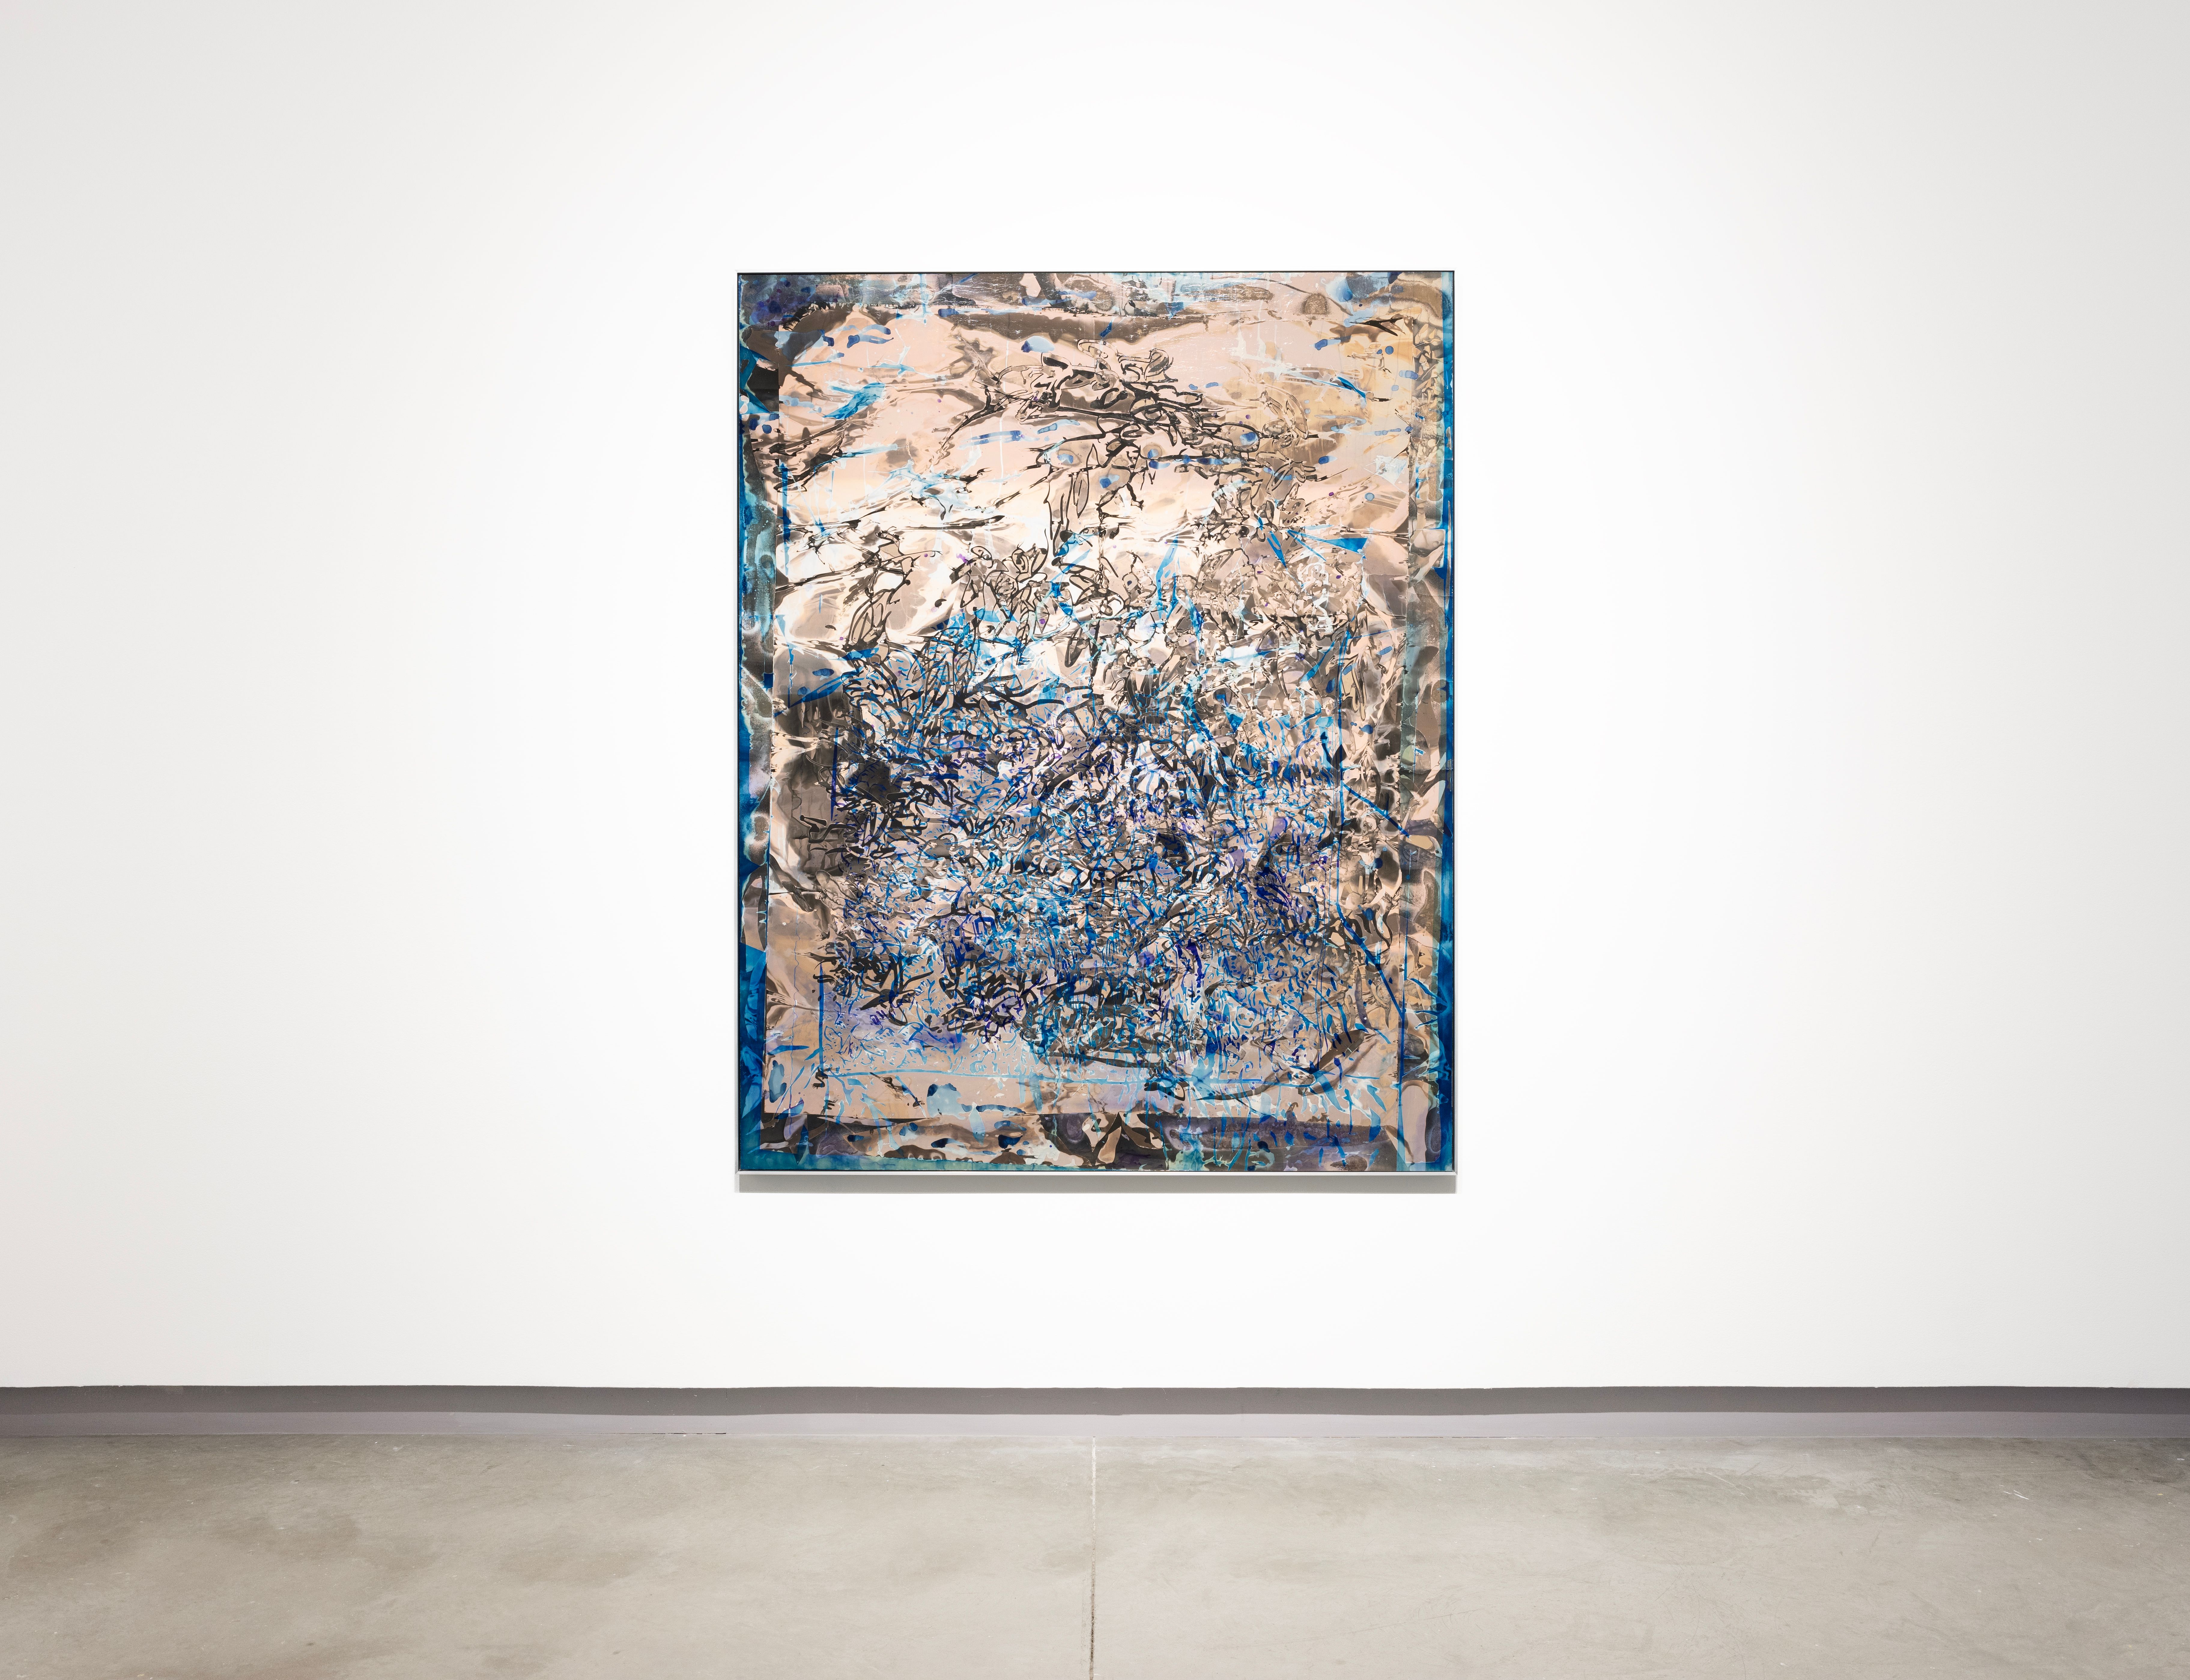 ENTER: installation view of a blue, tan, and black expressionist painting.